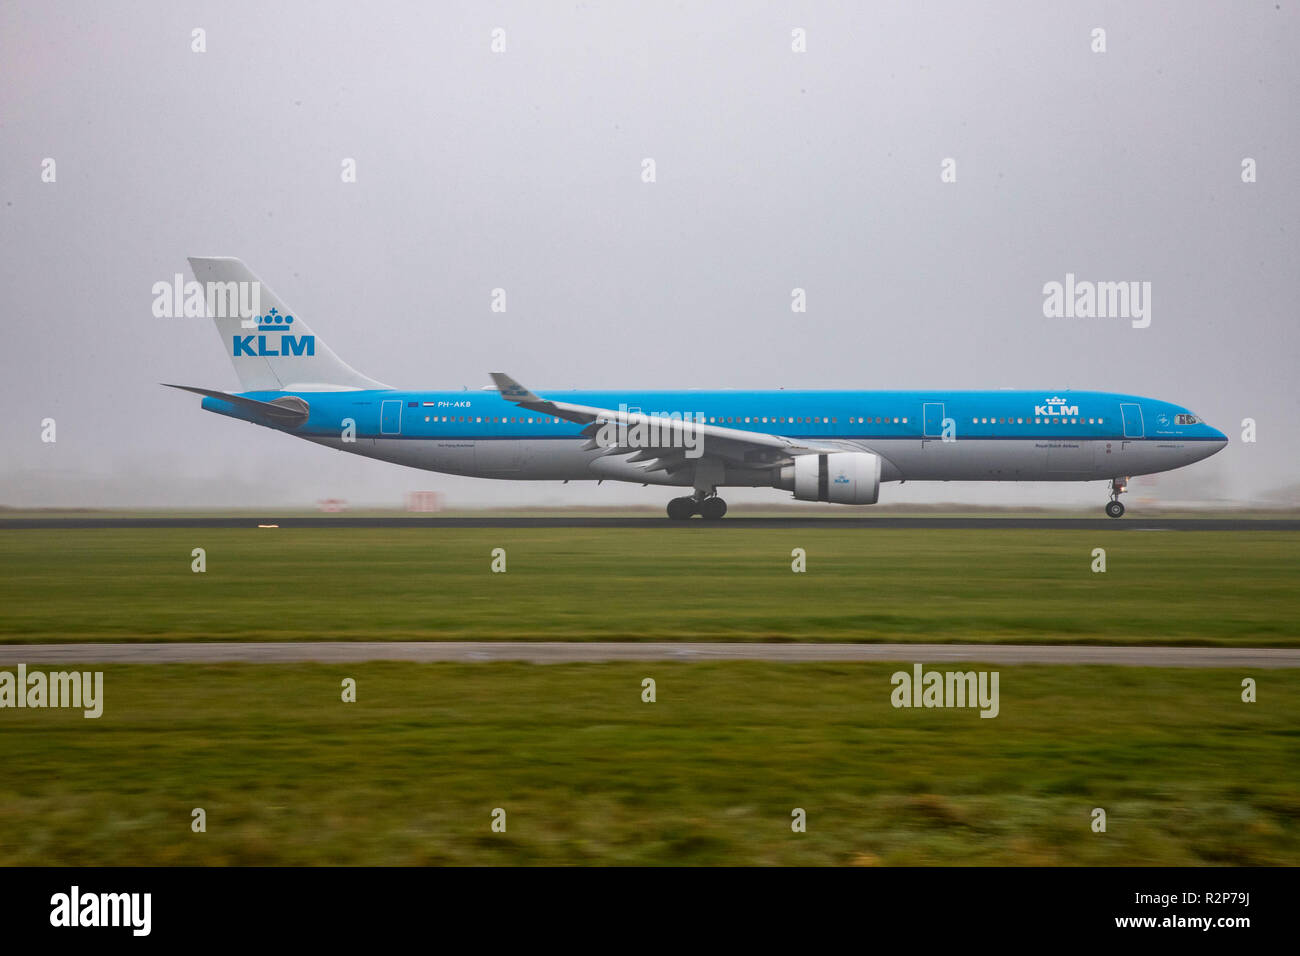 KLM Royal Dutch Airlines Airbus A330-300 with registration PH-AKB landing in misty weather at Amsterdam Schiphol Airport in The Netherlands. The aircraft has the name Piazza Navona - Roma. KLM operates a fleet of 117 airplanes, 13 of them are various editions of Airbus A330. Stock Photo